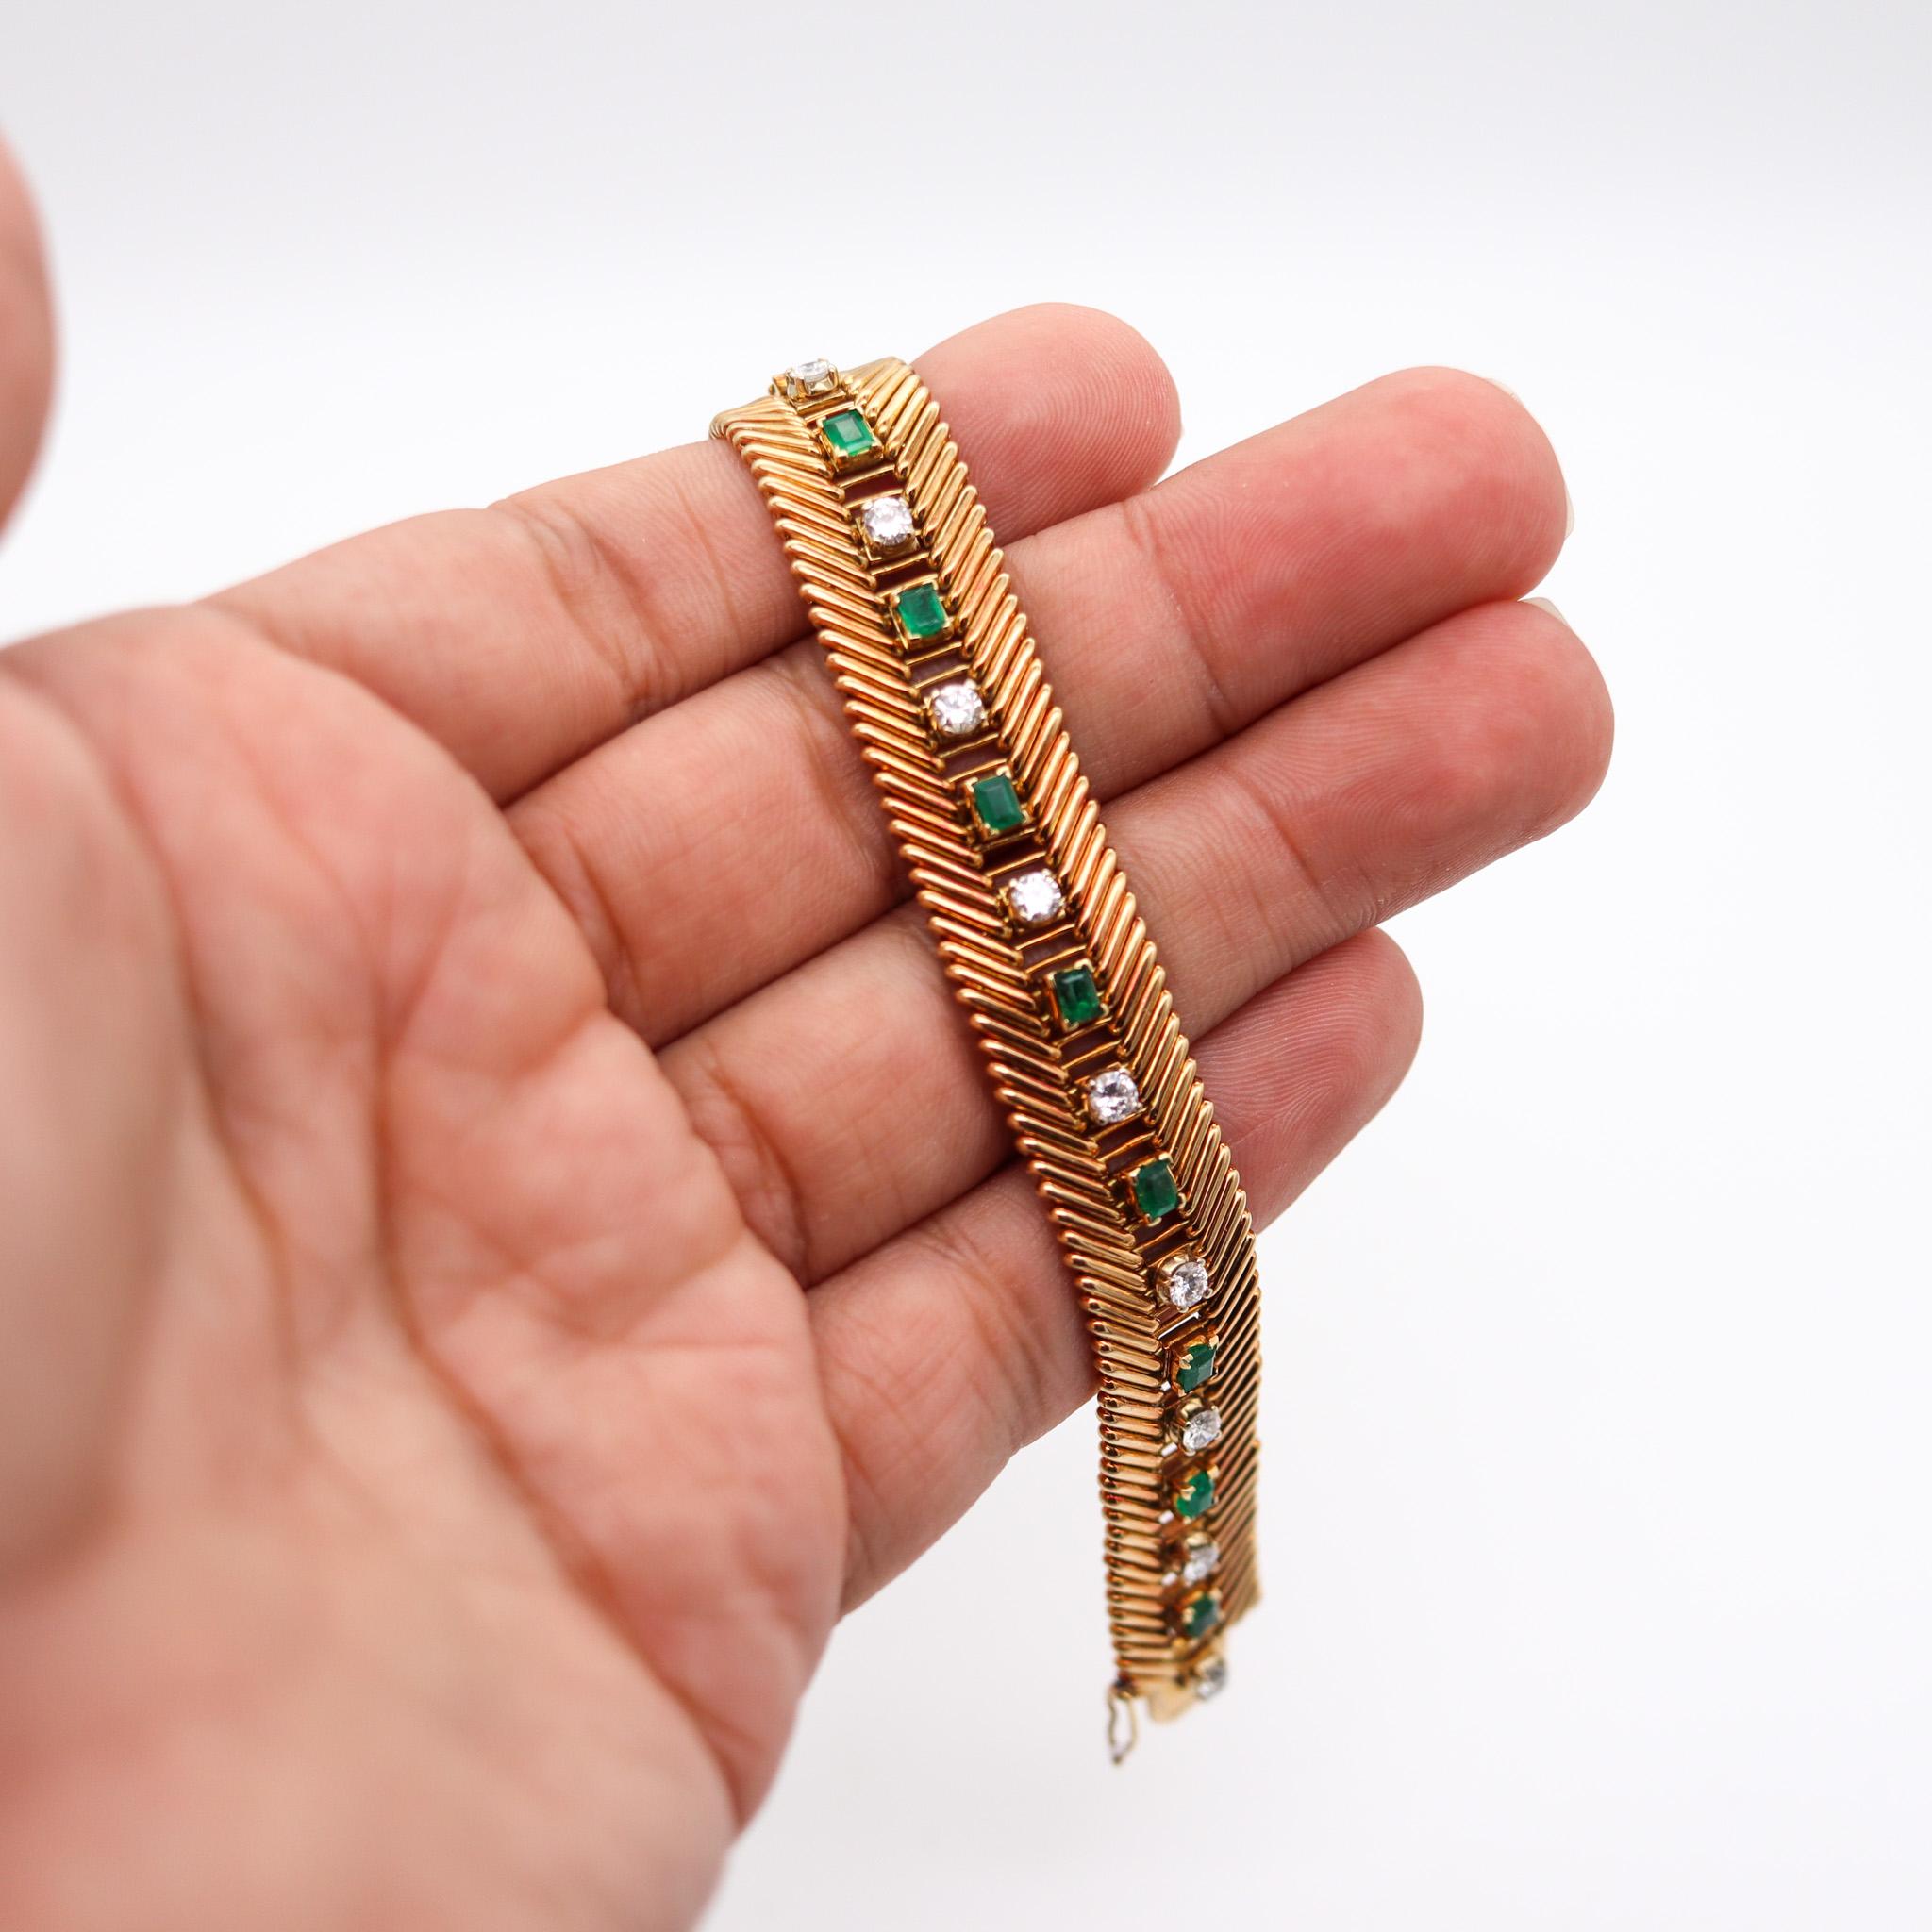 Women's Bvlgari Milano 1950 Bracelet in 18k Gold with 5.88ctw in Emerald and Diamonds For Sale